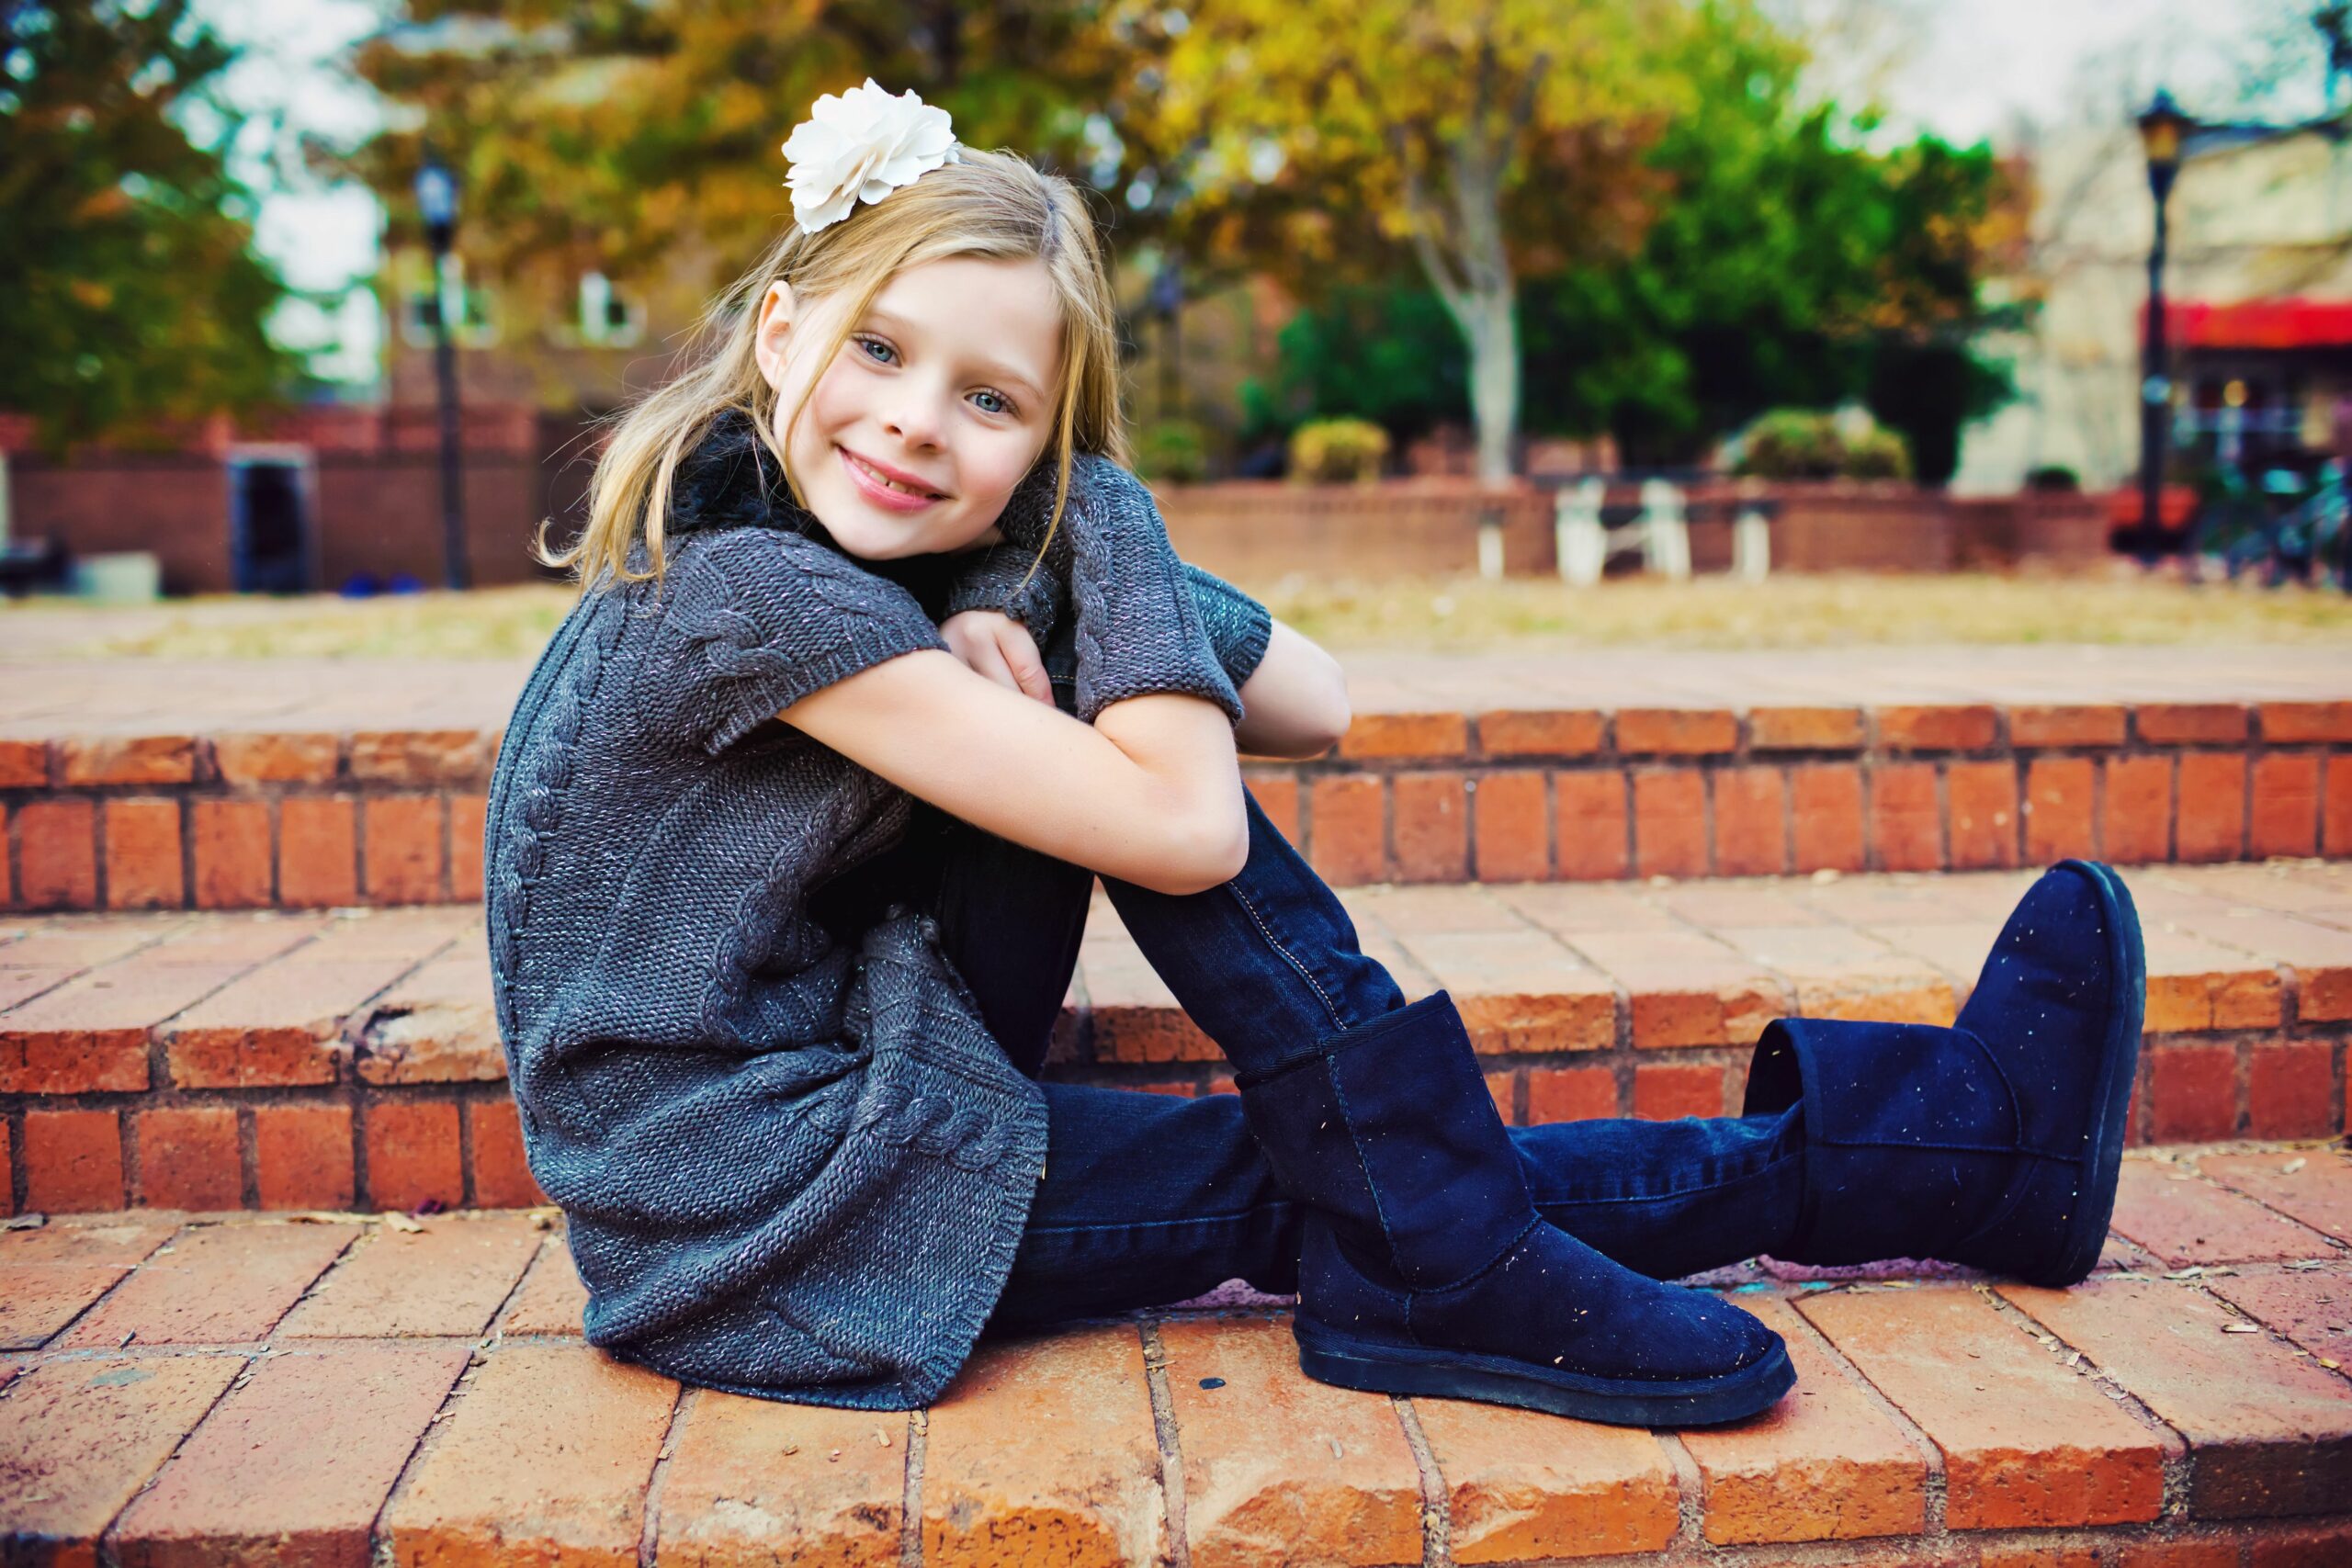 What is the best child model agency?